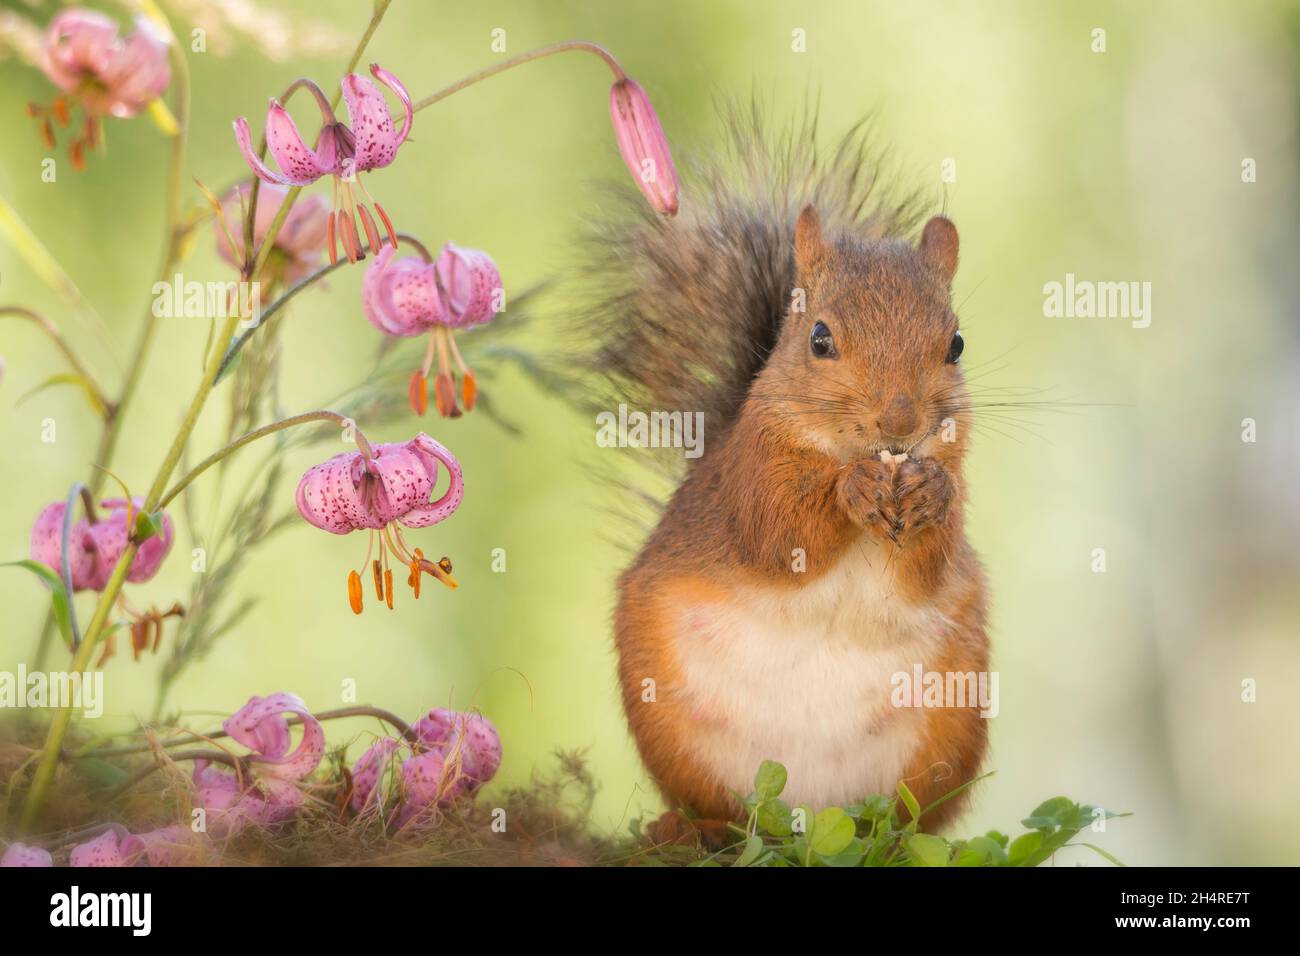 close up of red squirrel with flowers Stock Photo